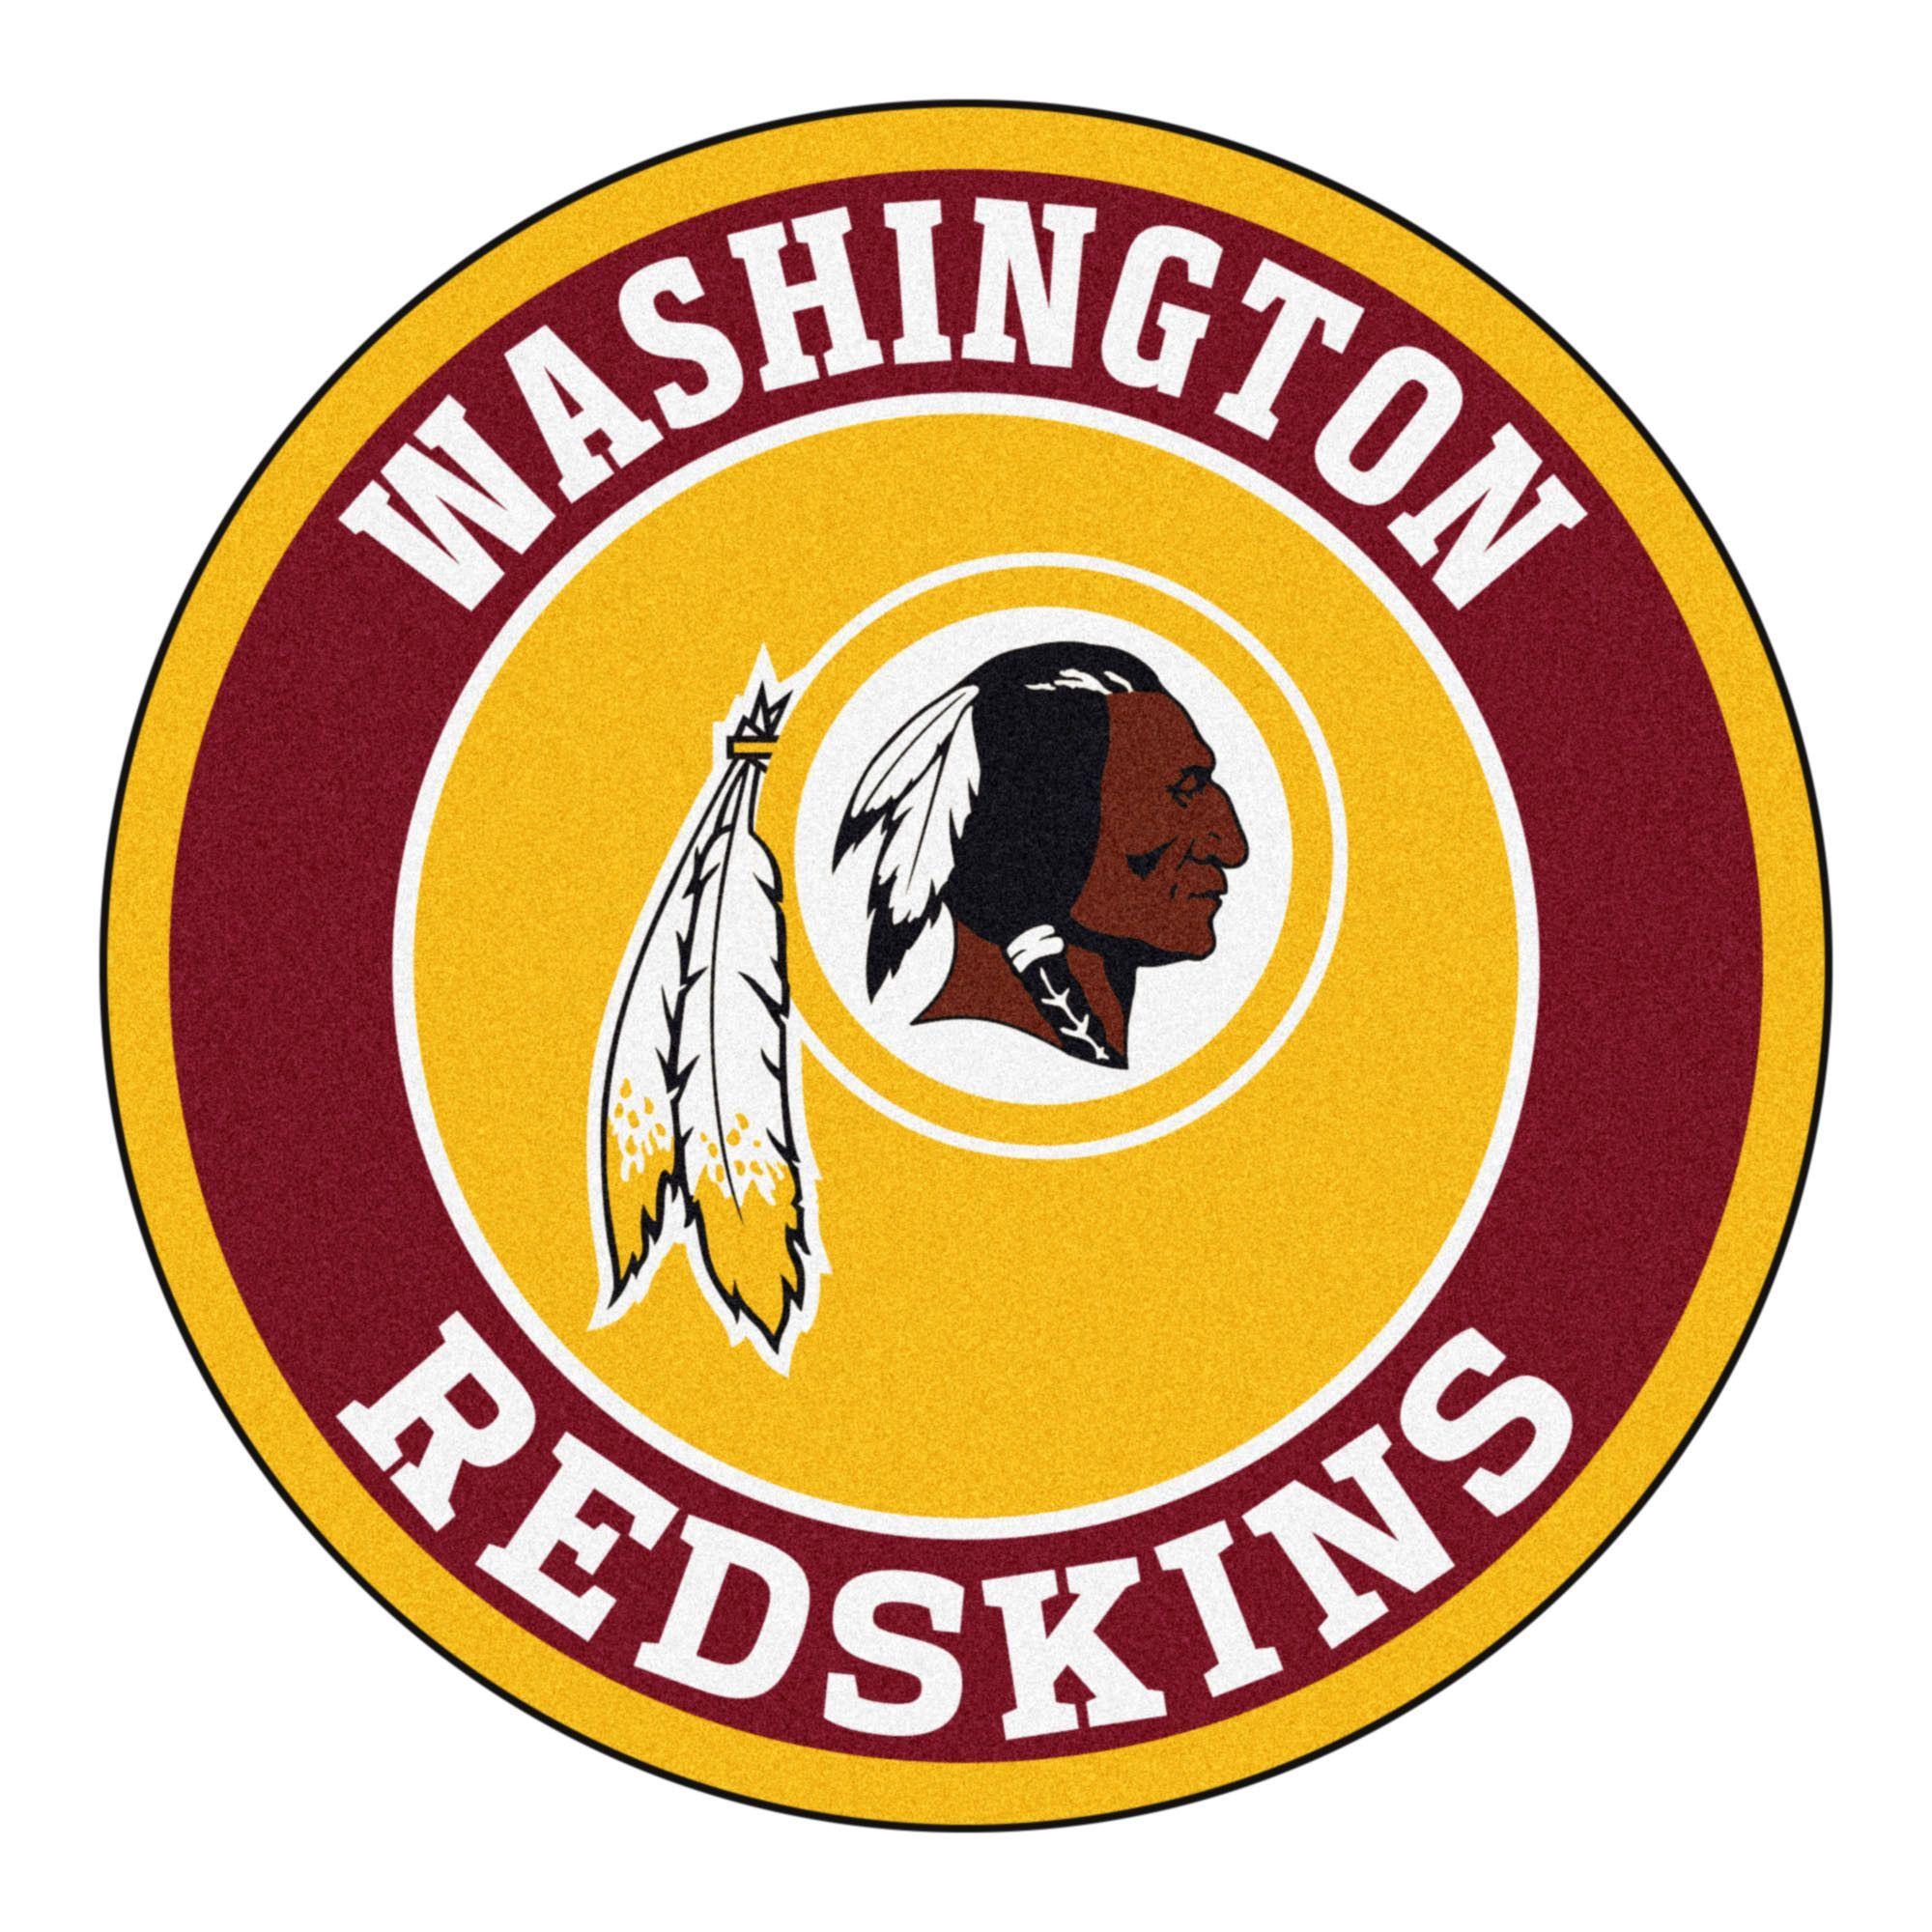 Redskins W Logo - For all those NFL fans out there, these 27